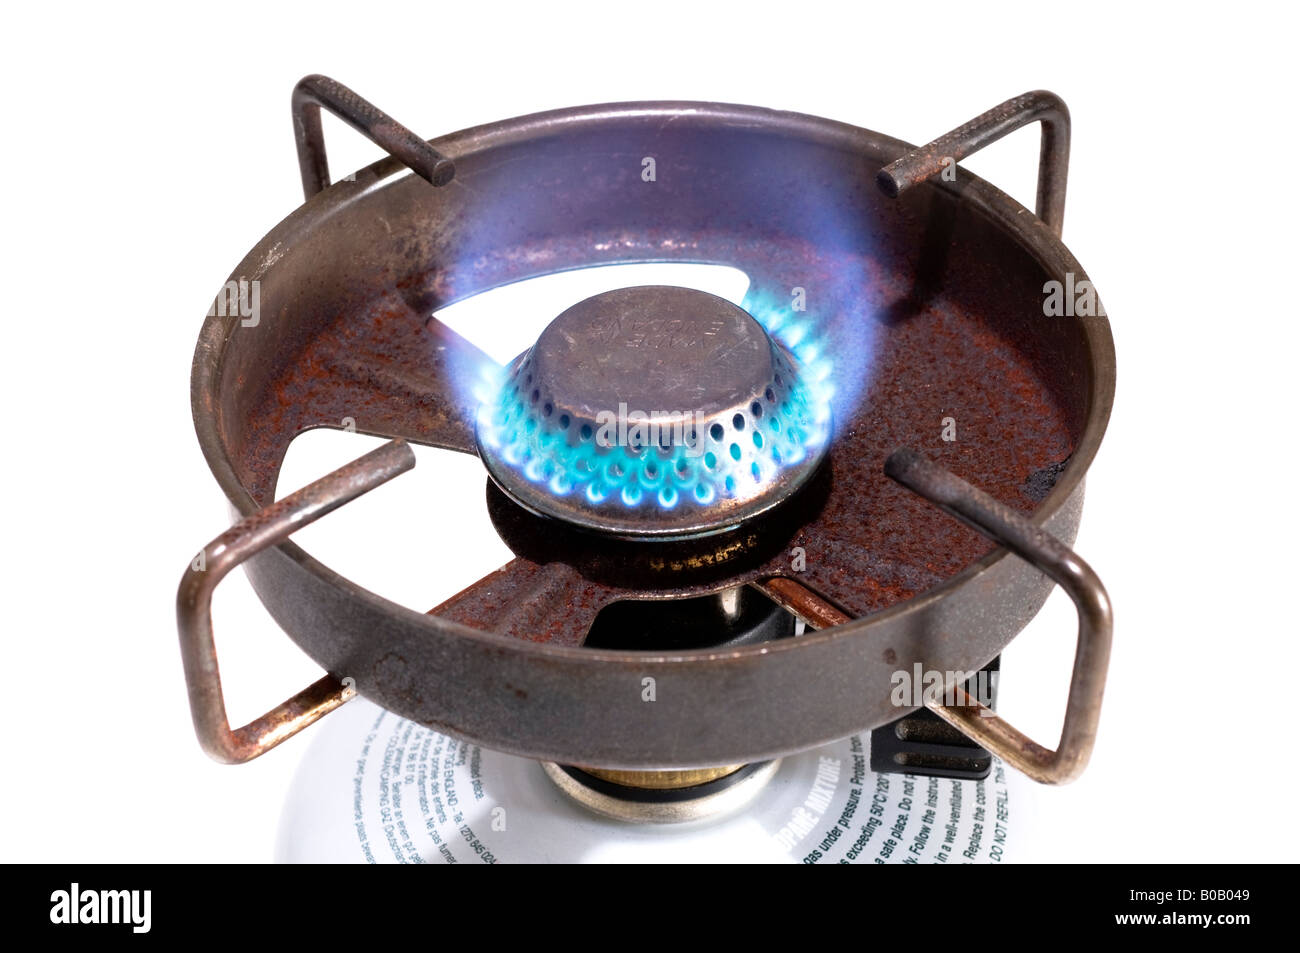 An old lit portable camping stove and gas canister Stock Photo - Alamy